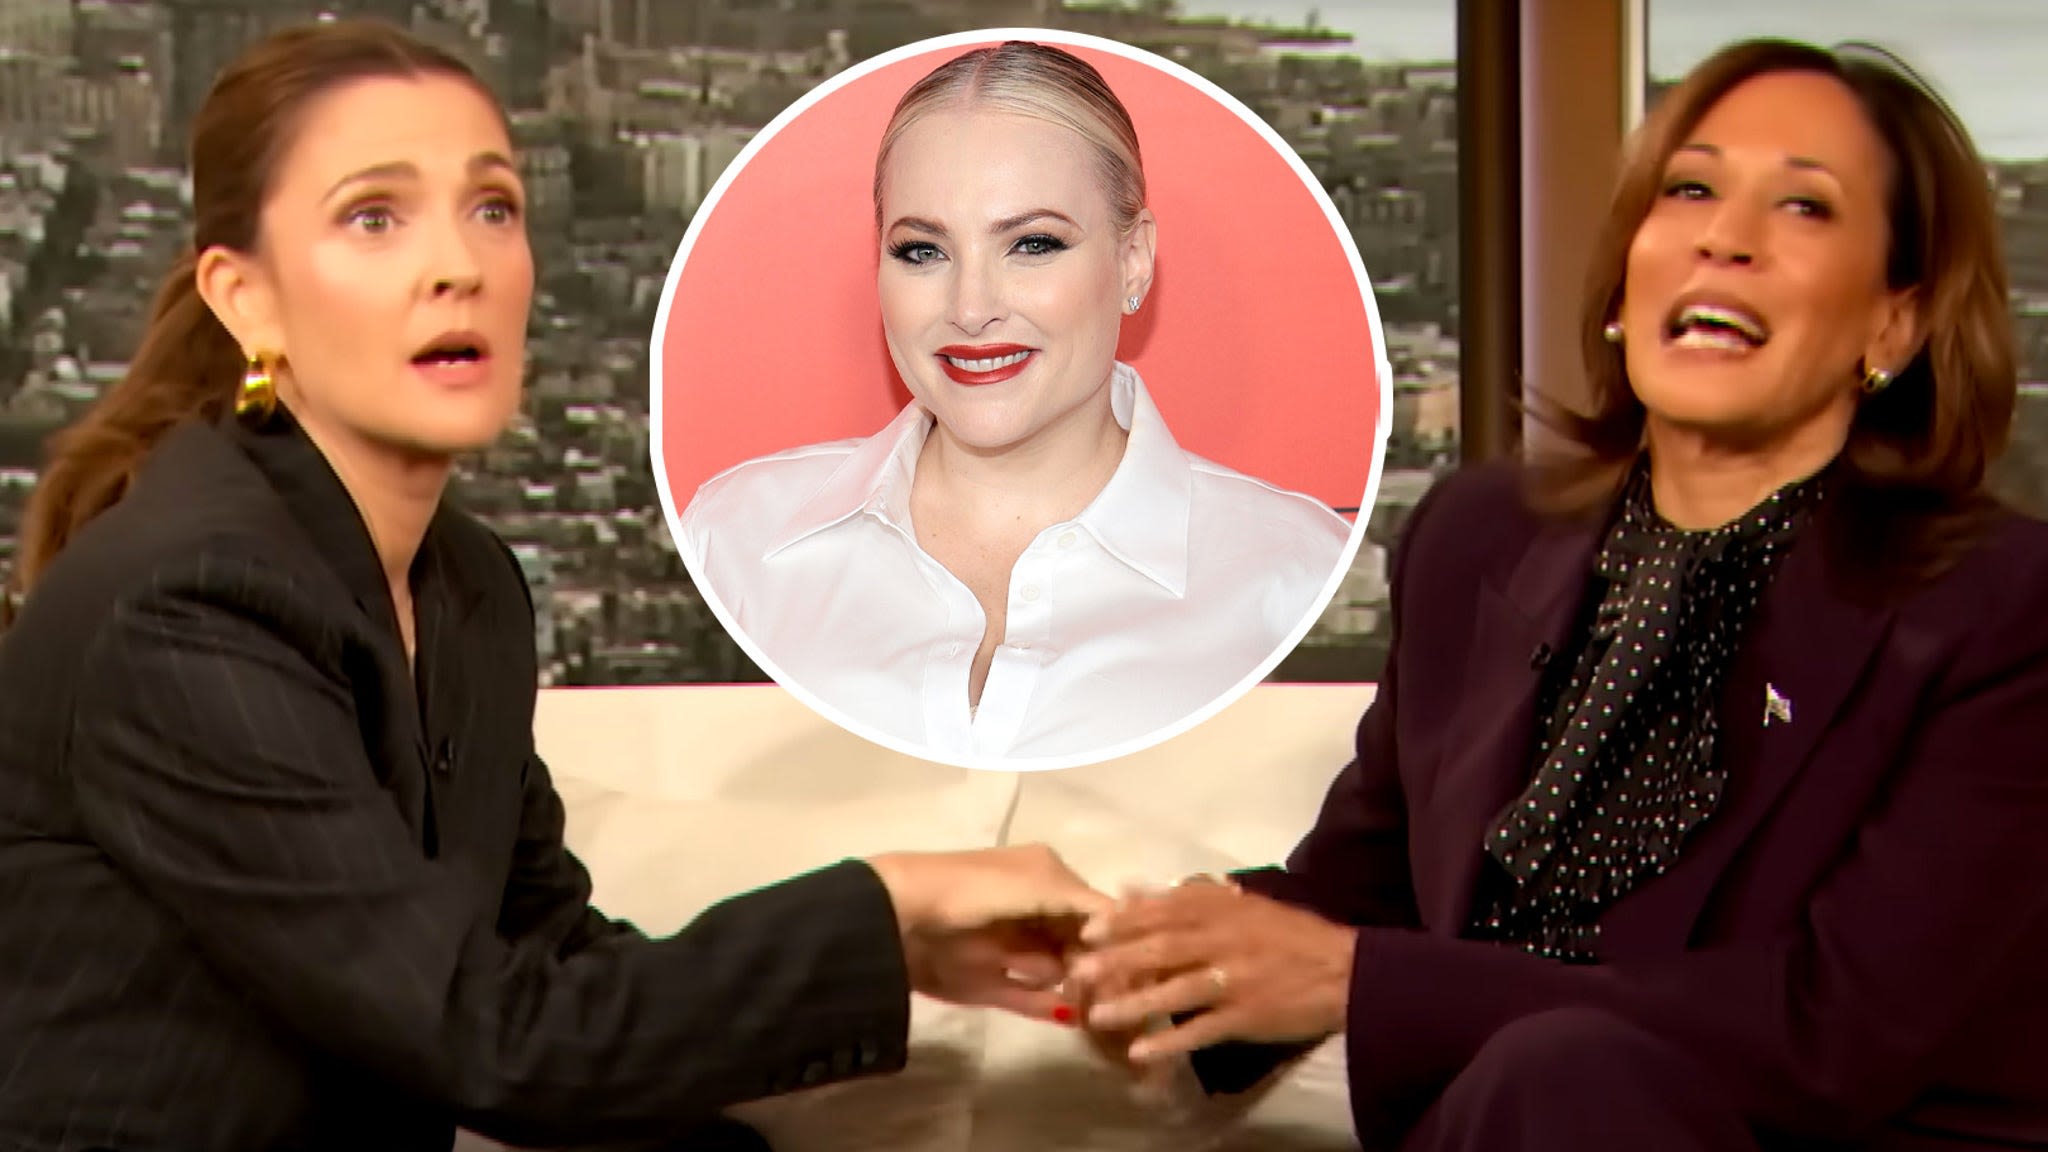 Meghan McCain Trashes Drew Barrymore's 'Momala' Harris Moment: 'Have Some F--king Respect'